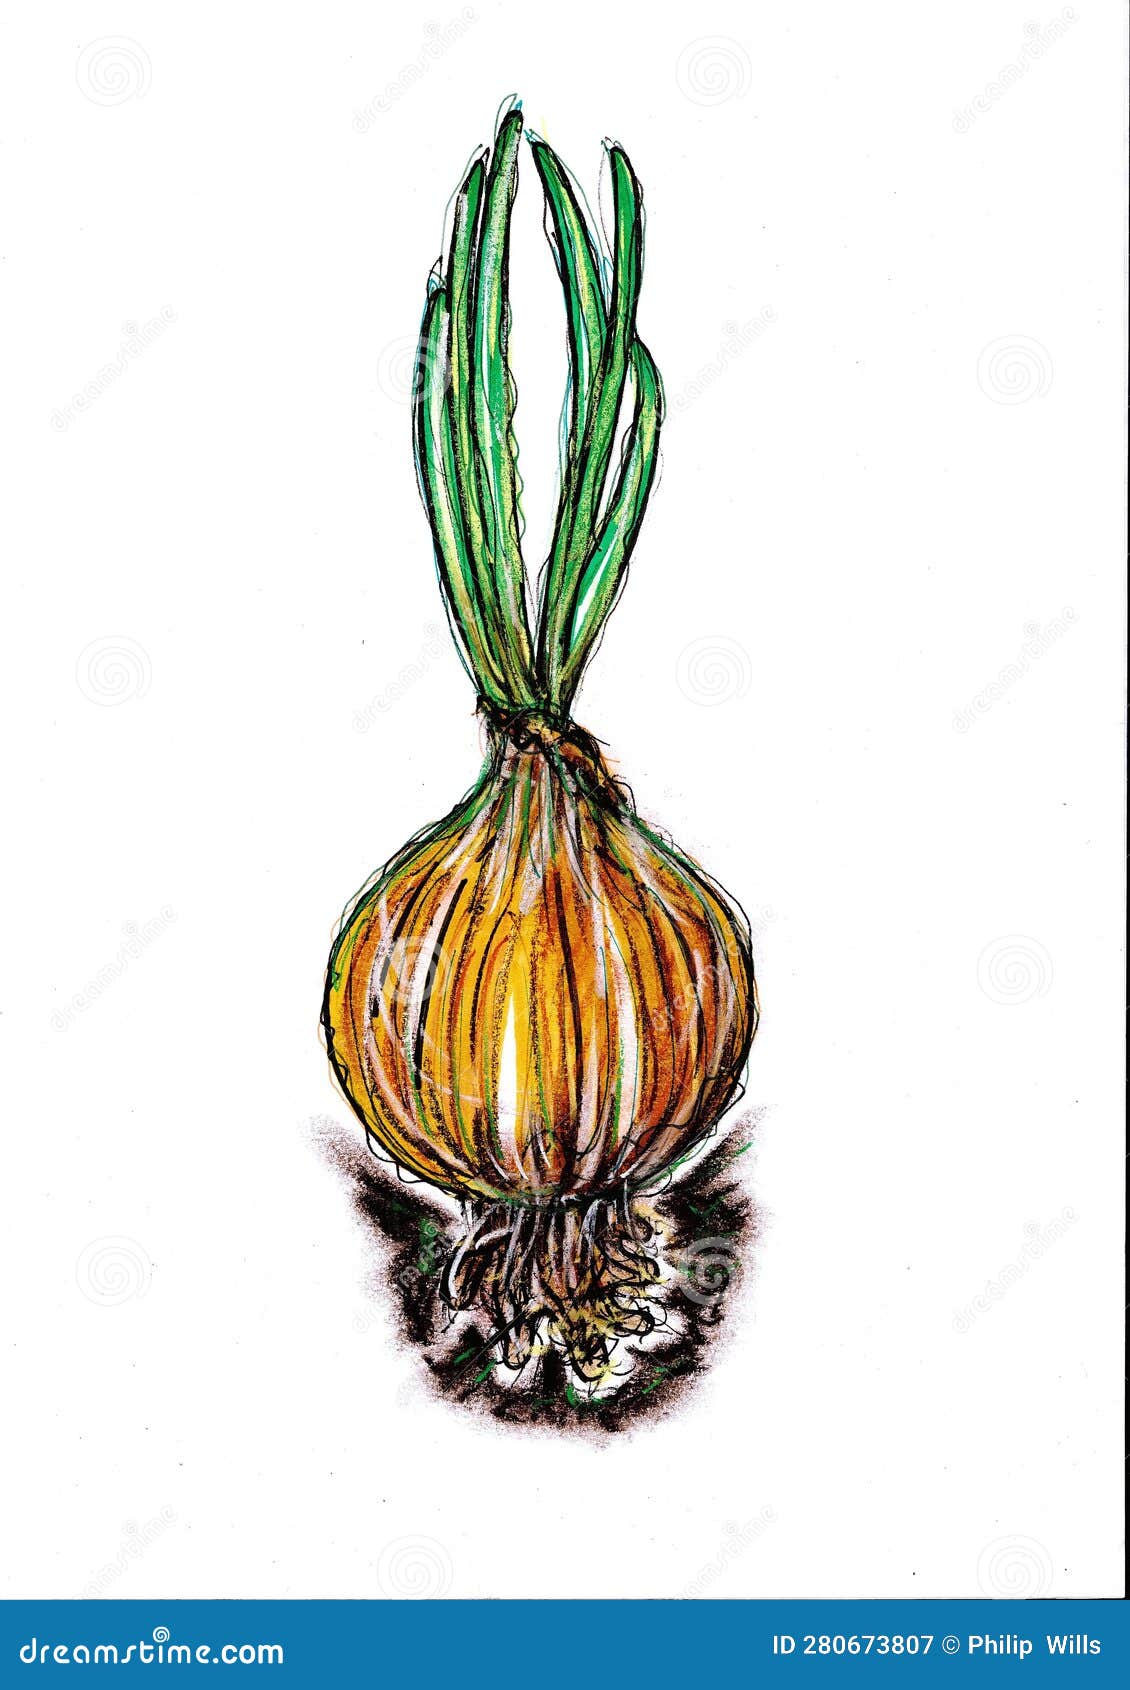 A Half Of Shallot Vegetable Watercolor Illustration, Shallot, Onion,  Vegetable PNG Transparent Image and Clipart for Free Download